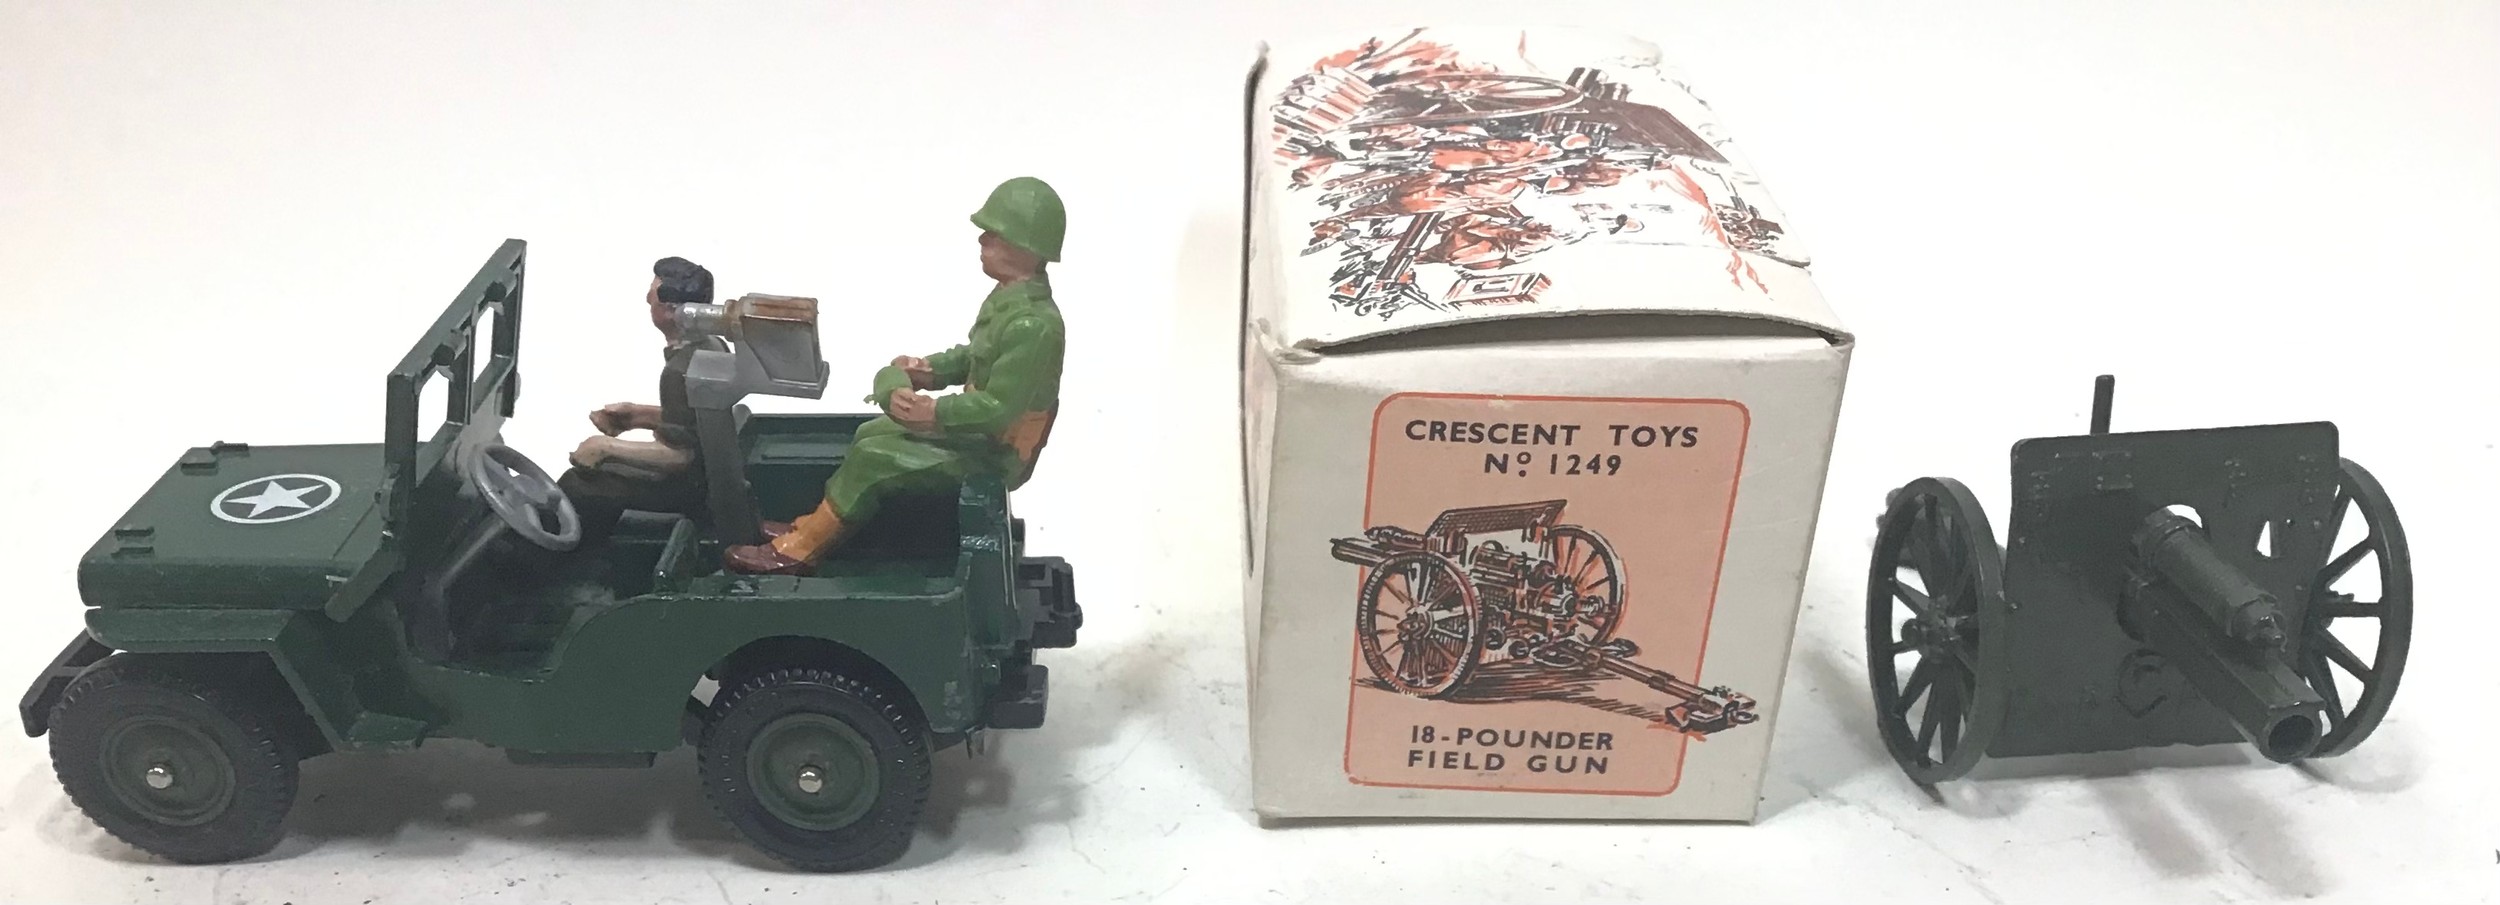 Britains American jeep (unboxed) with a Crescent 18" field gun - Image 4 of 5